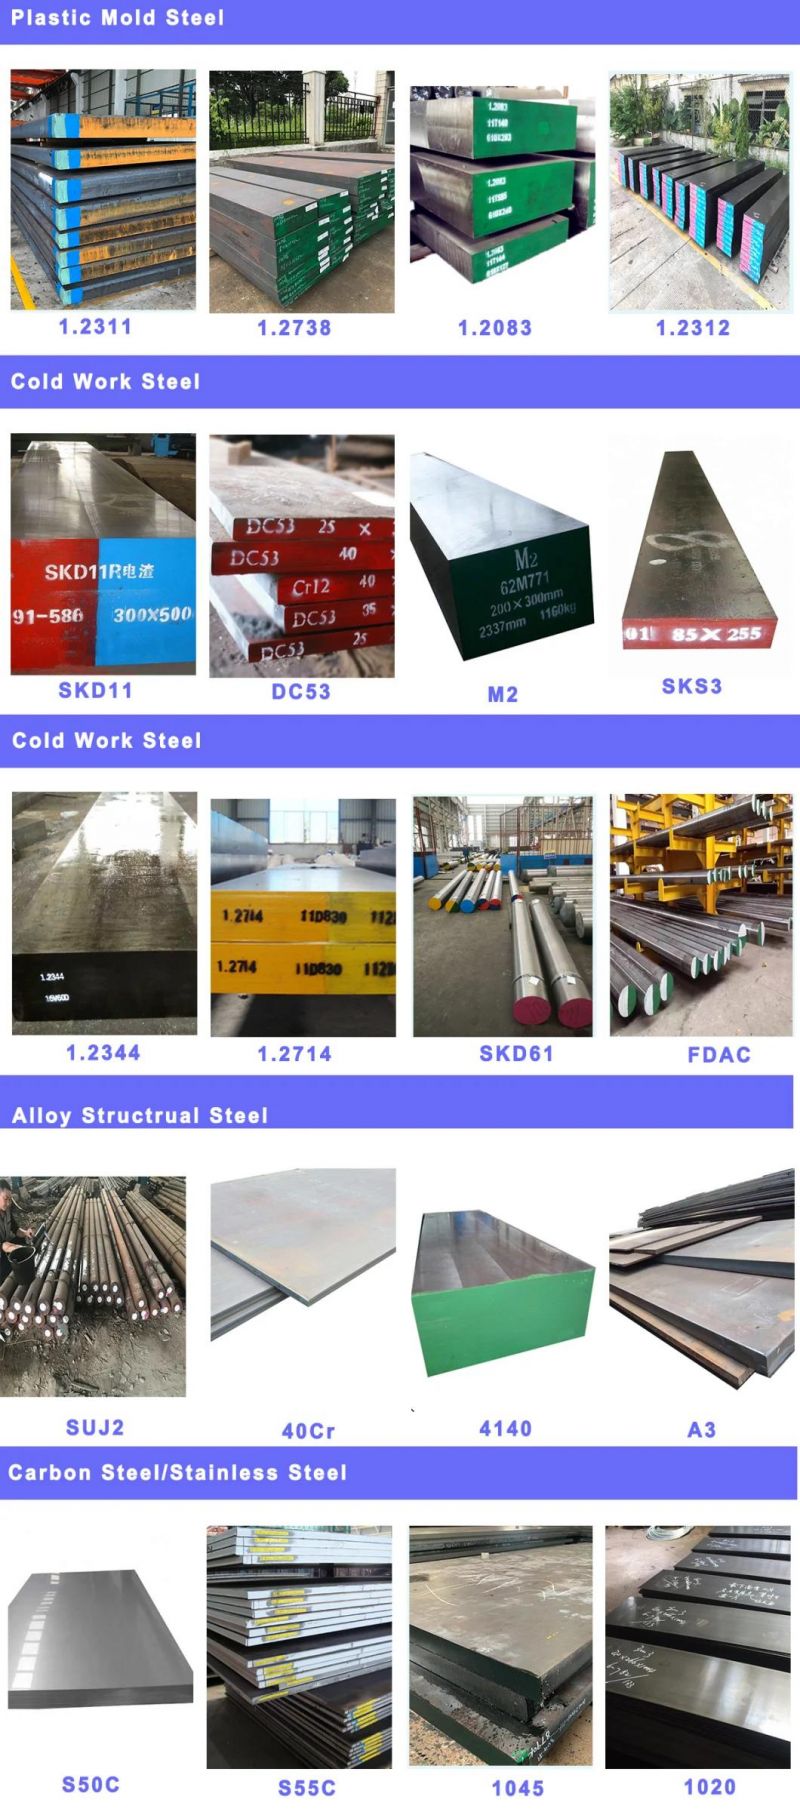 Tool Steel Cold Work Steel Grades Alloy Steel Cr12D3 1.2080 Mould Steel Flat Hot Rolled Steel Forged Mould Industrial Mold Steel Material